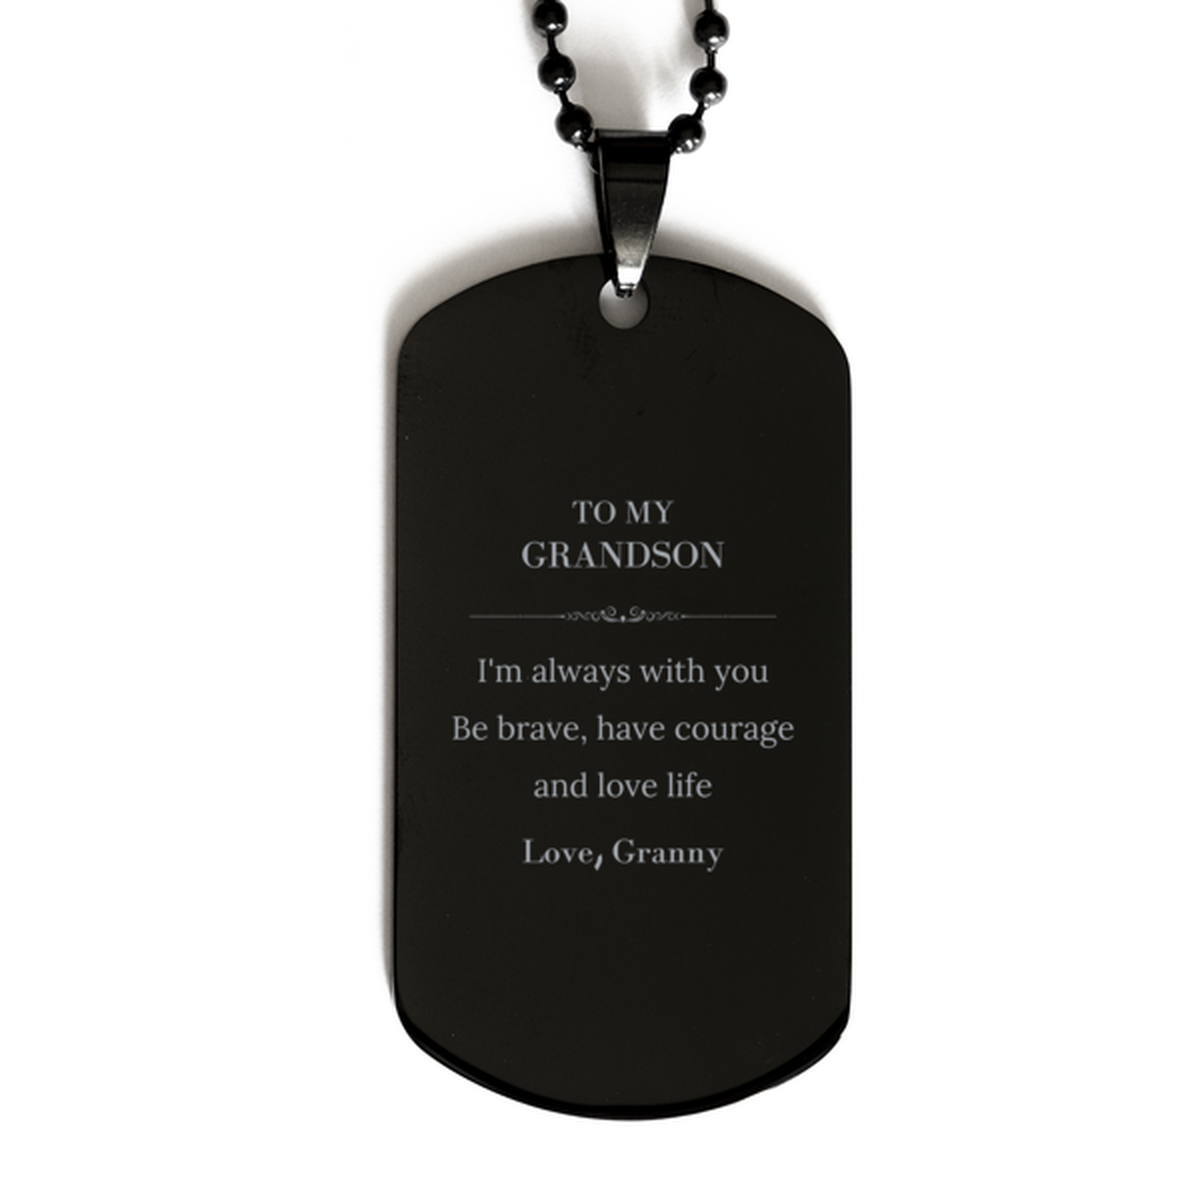 To My Grandson Gifts from Granny, Unique Black Dog Tag Inspirational Christmas Birthday Graduation Gifts for Grandson I'm always with you. Be brave, have courage and love life. Love, Granny